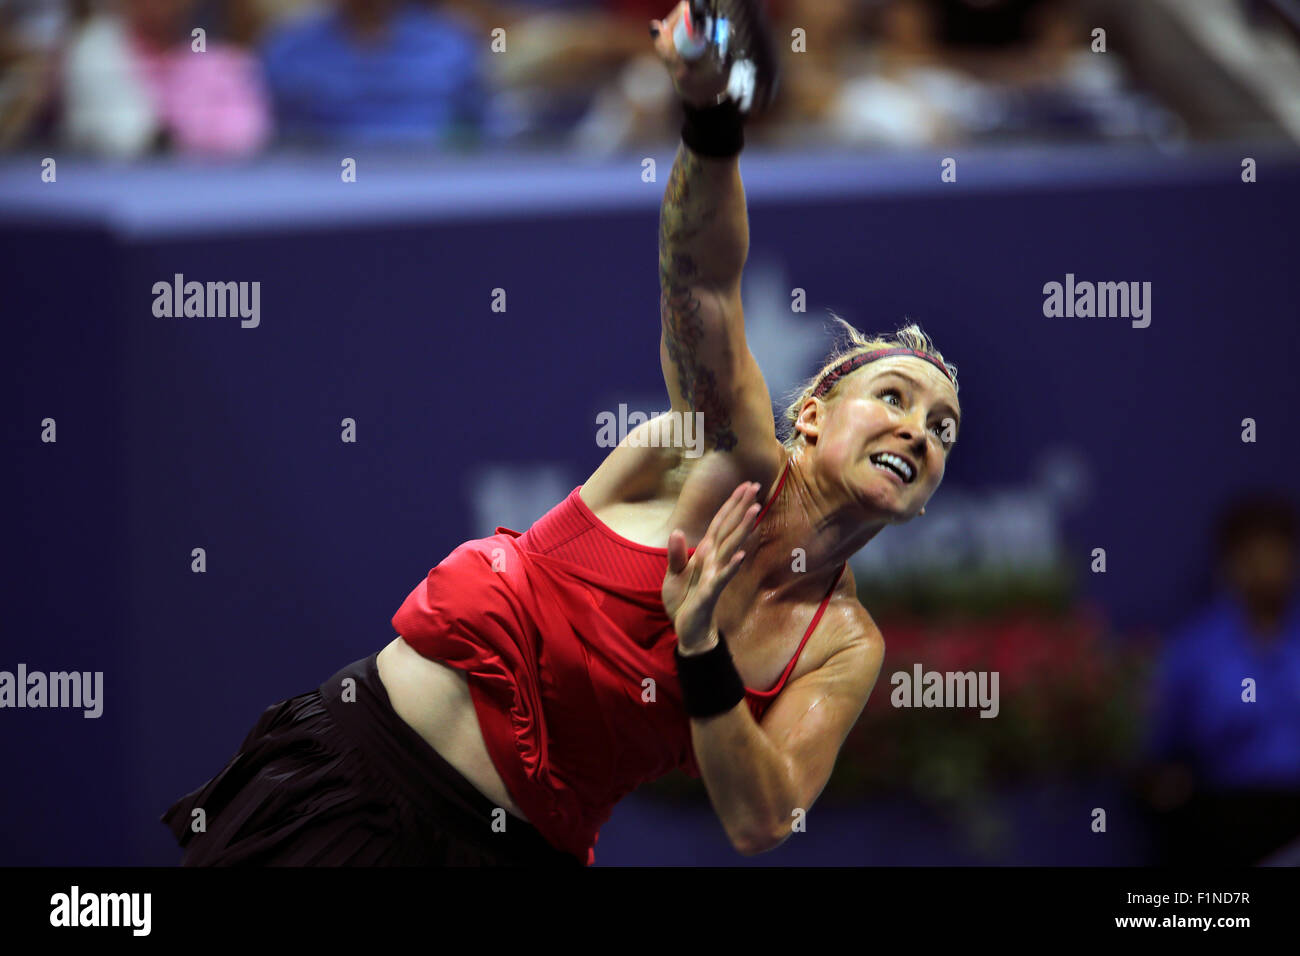 New York, USA. 4th September, 2015. Bethanie Mattek-Sands serving during her third round match against Serena Williams at the U.S. Open in Flushing Meadows, New York on September 4th, 2015.  Williams won the match in three sets after losing the first set to Mattek-Sands. Credit:  Adam Stoltman/Alamy Live News Stock Photo